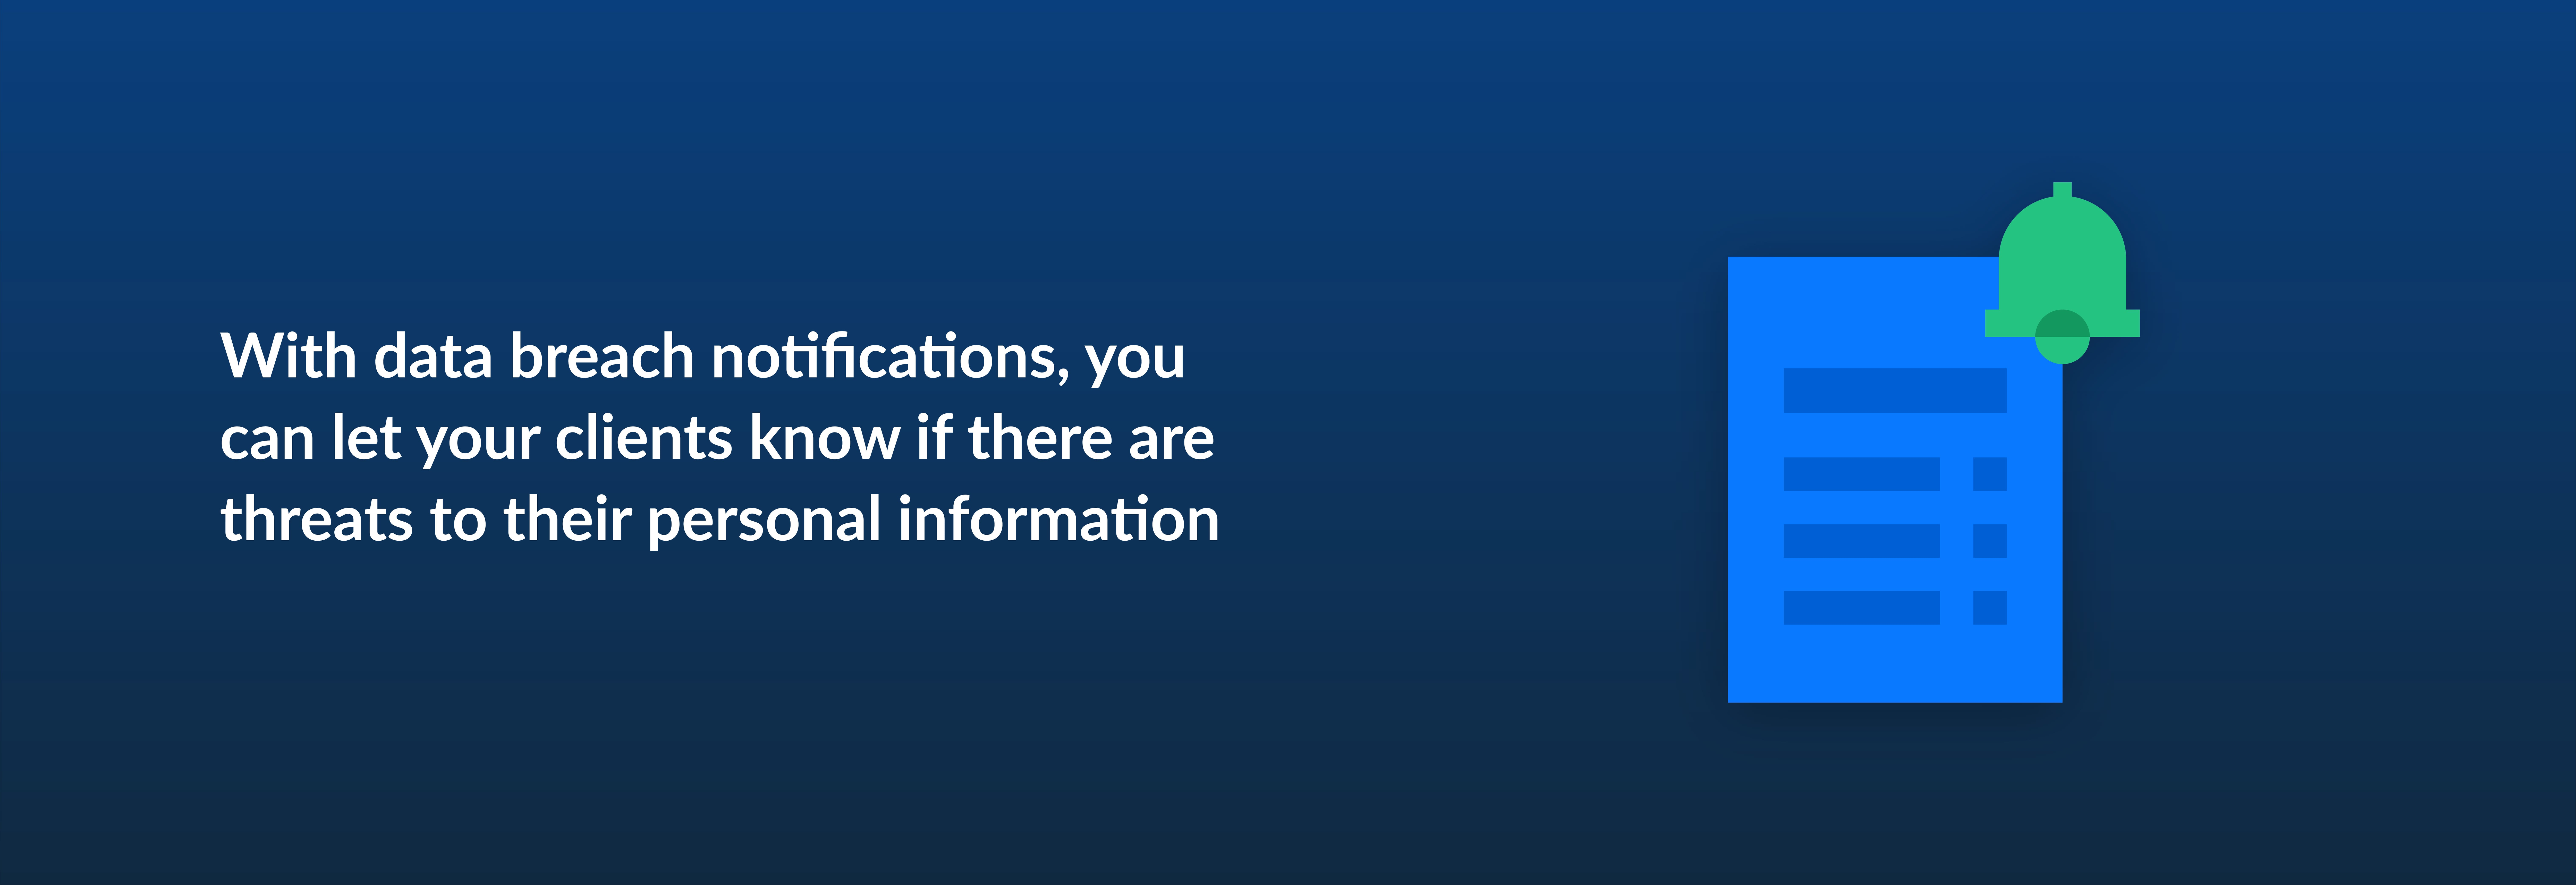 With data breach notifications, you can let your clients know if there are threats to their personal information